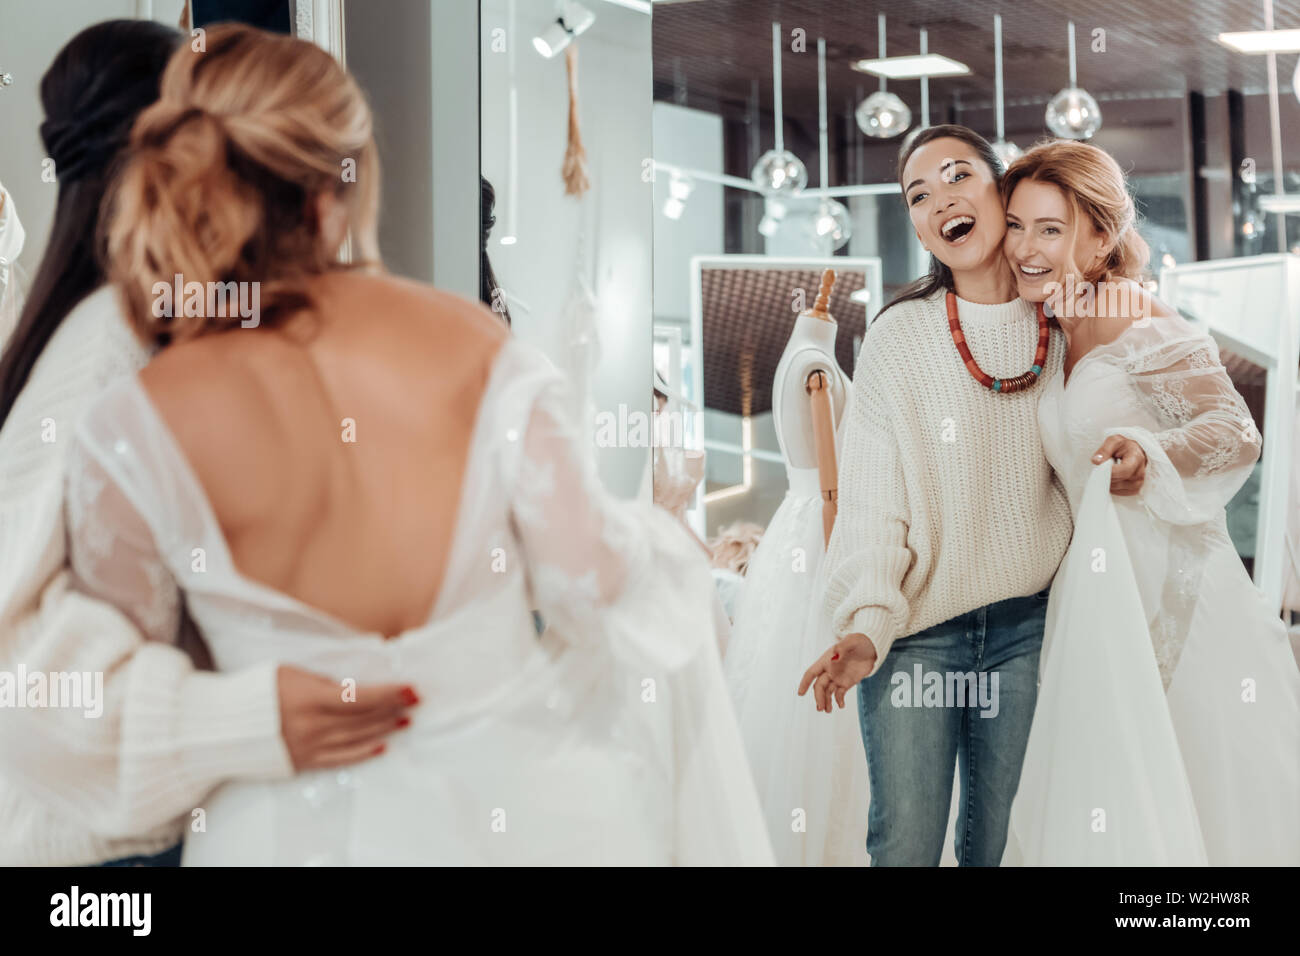 Two happy women hugging in front of the mirror. Stock Photo